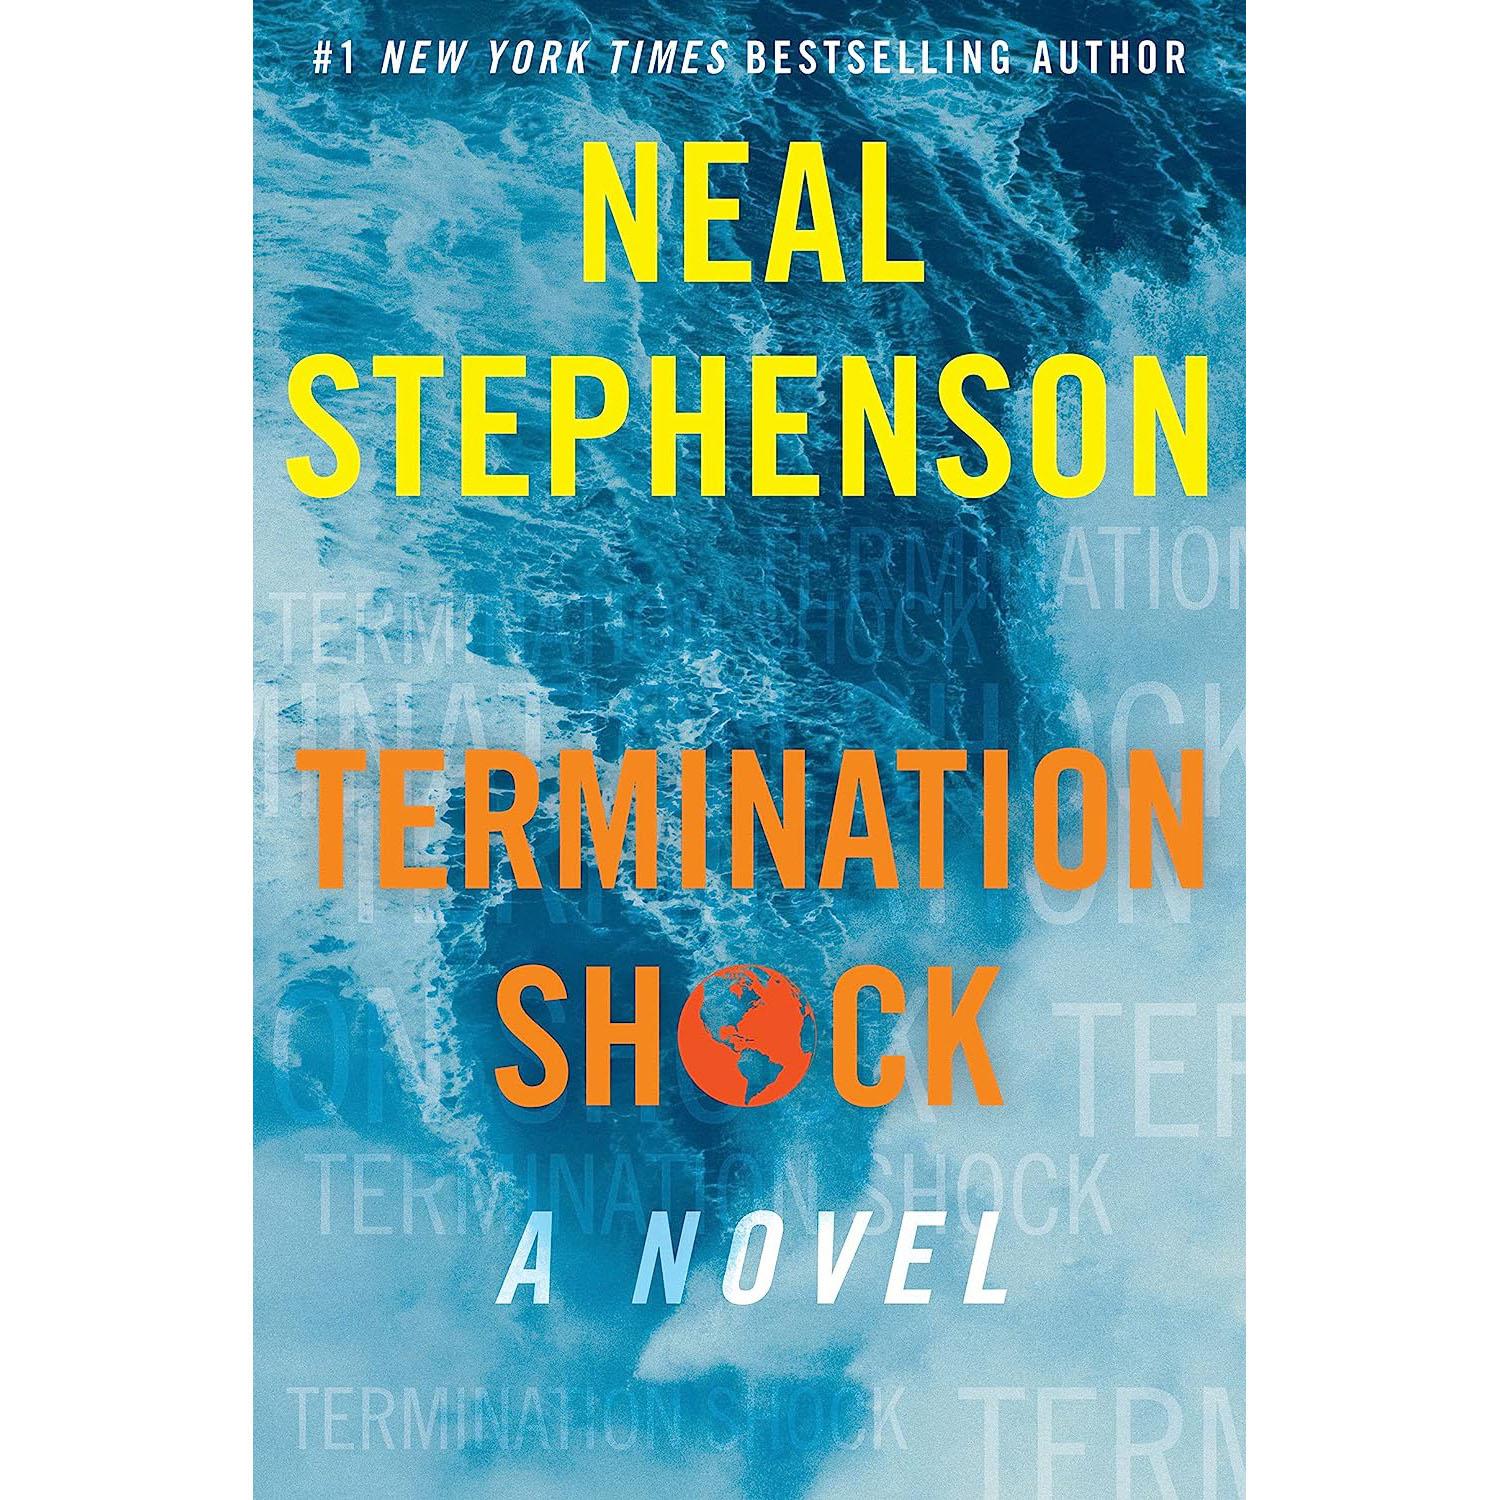 Termination Shock eBook for $1.99